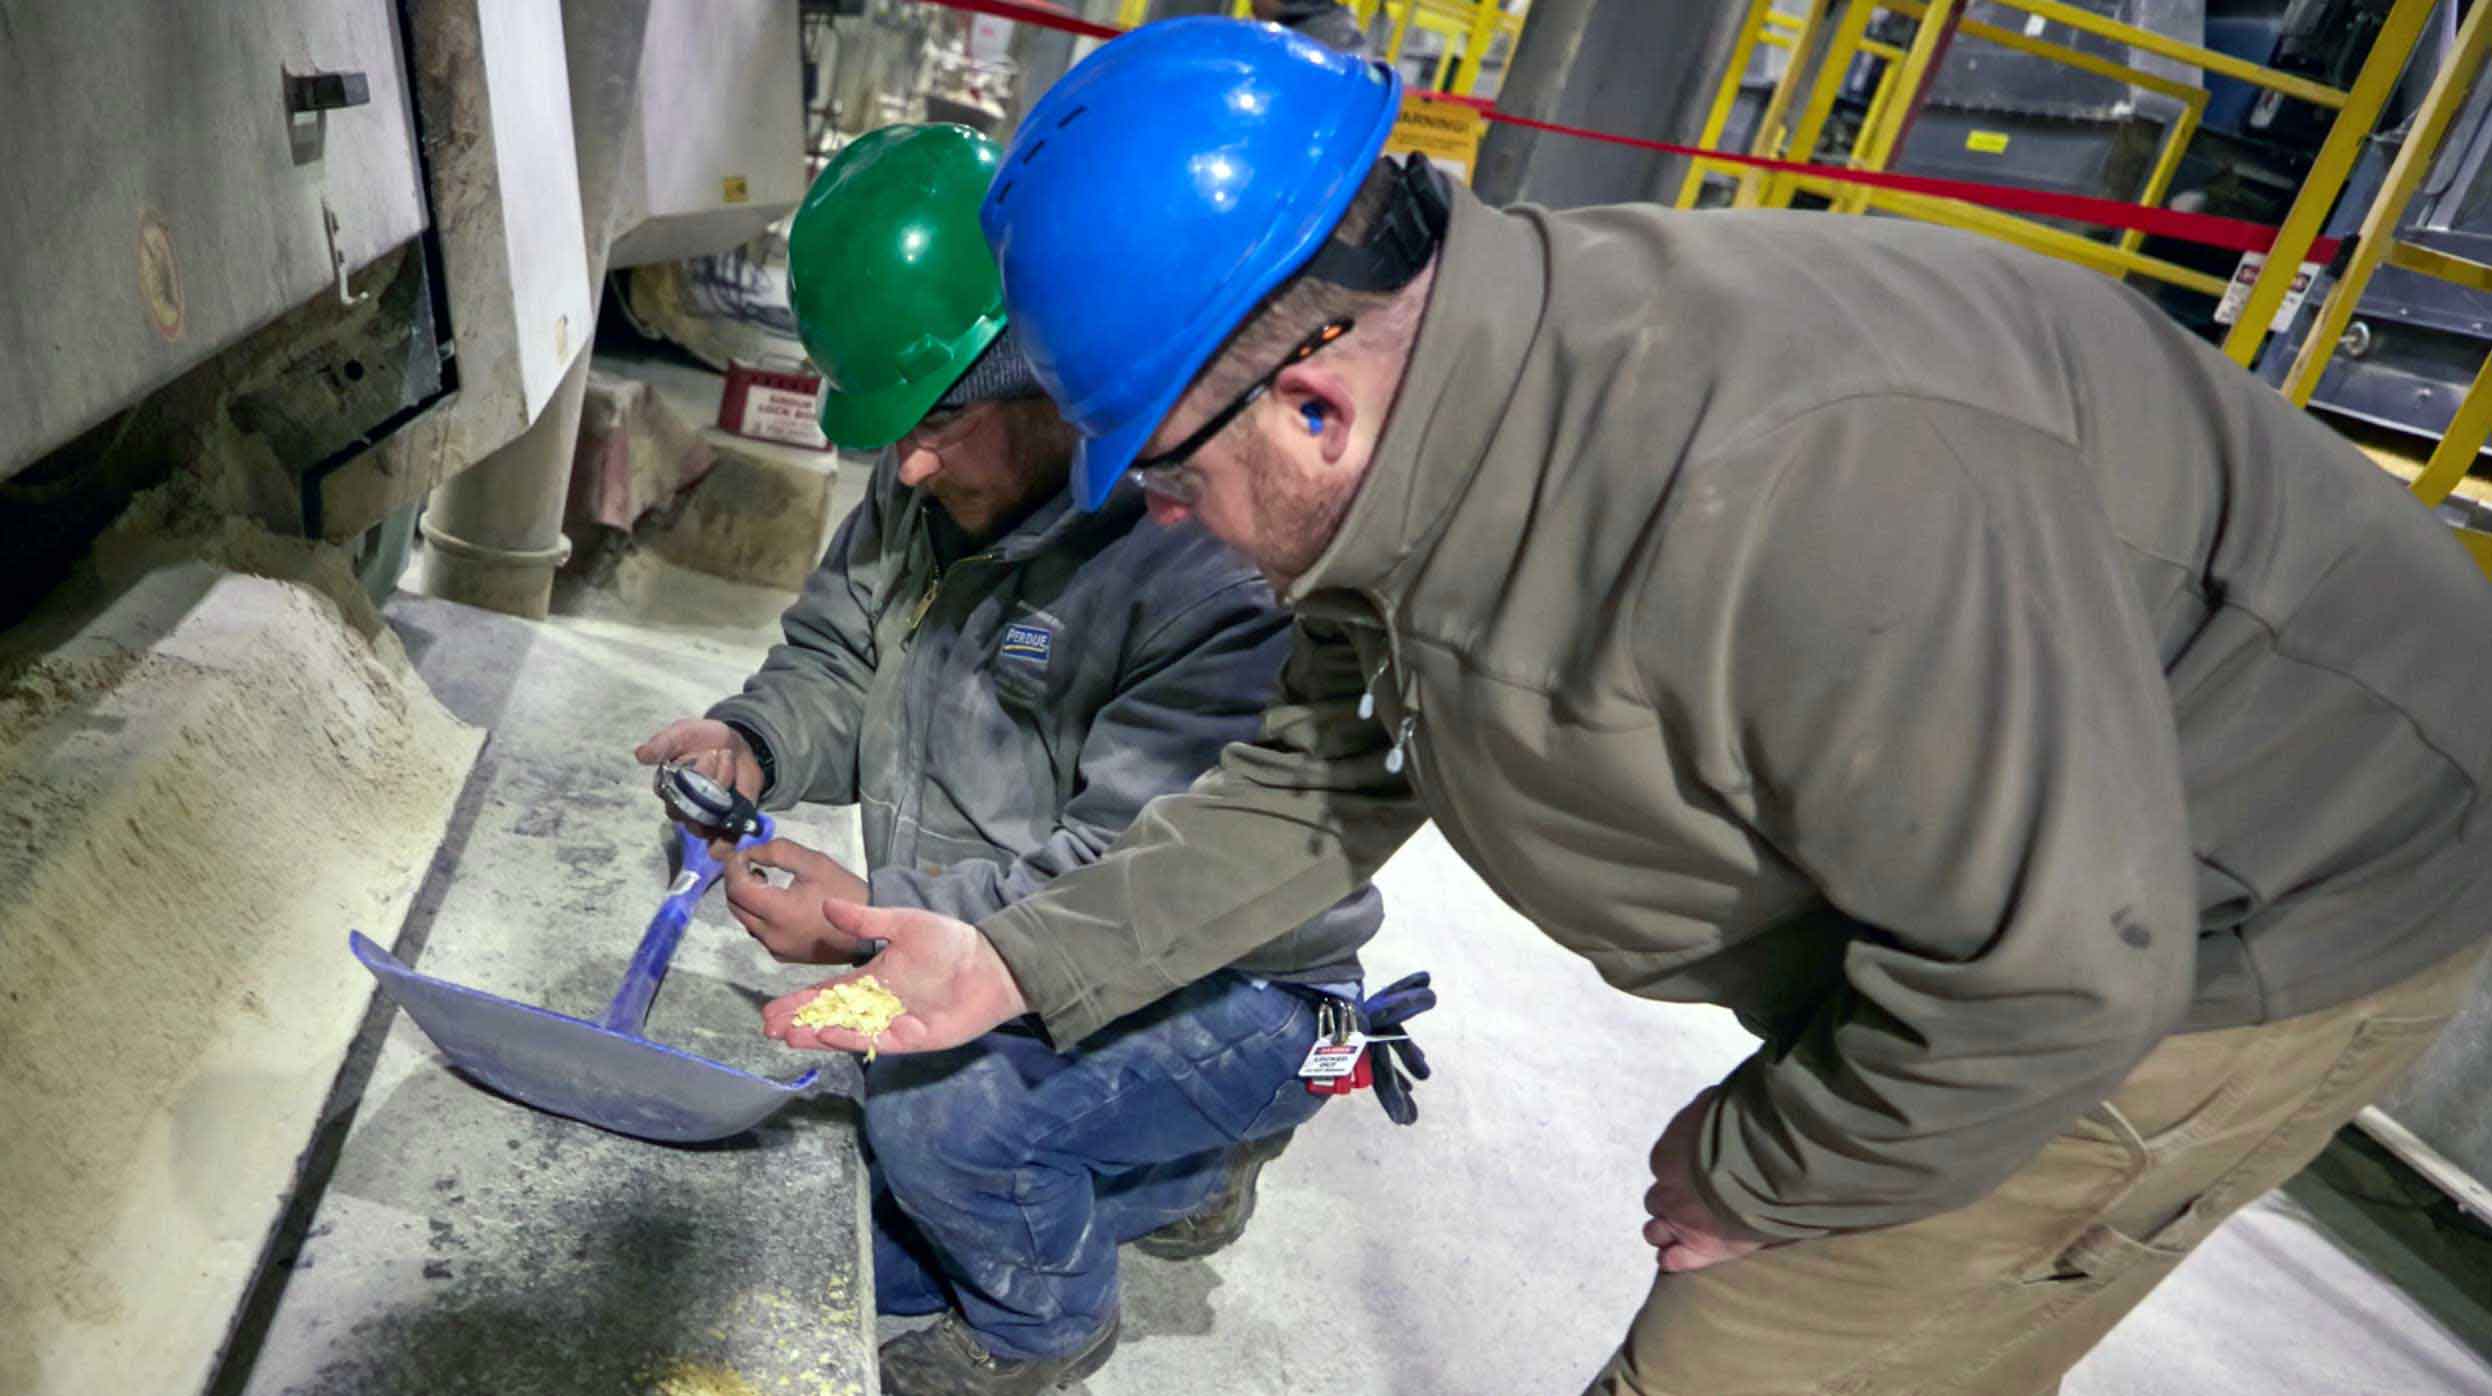 Two men in hardhats in a factory setting. One kneeling by a shovel looking at a gauge and one leaning over looking at material in the palm of his hand.